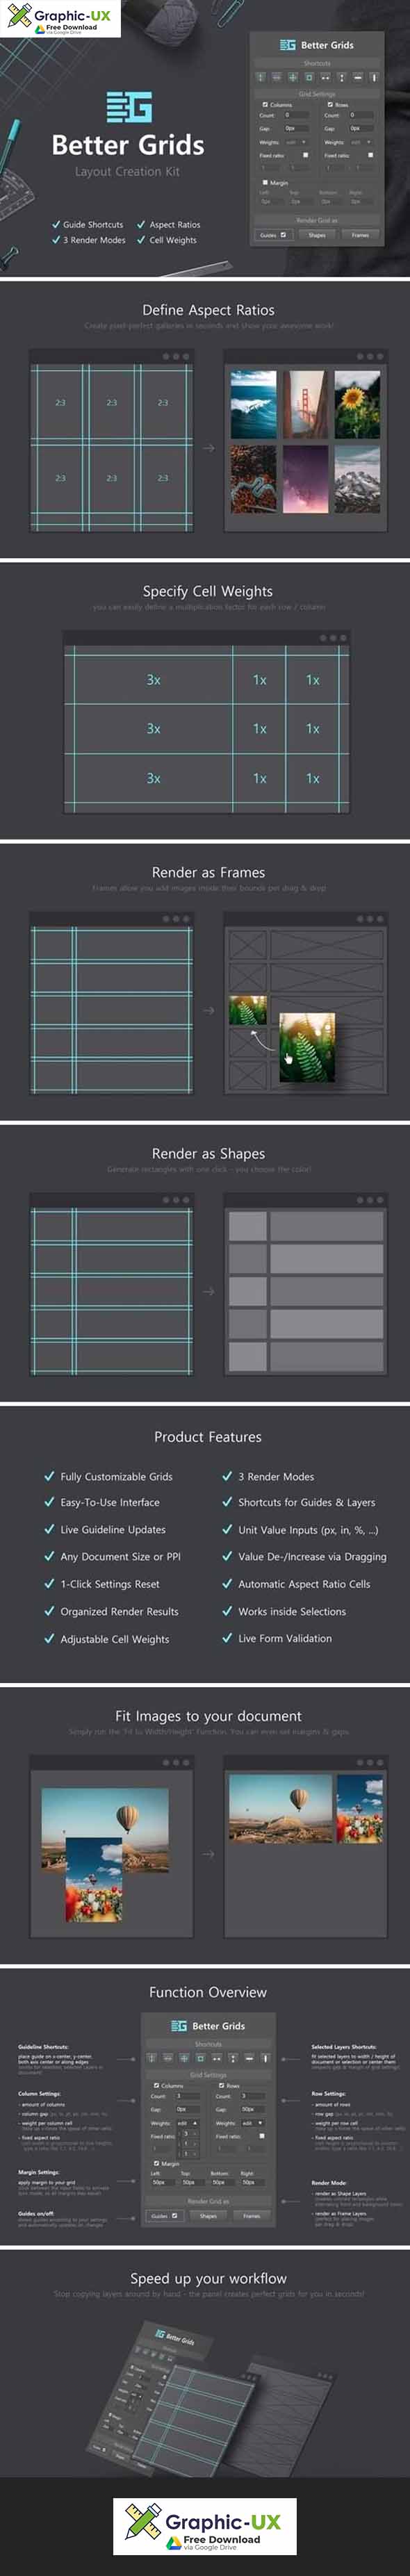 Better Grids - Layout Creation Kit